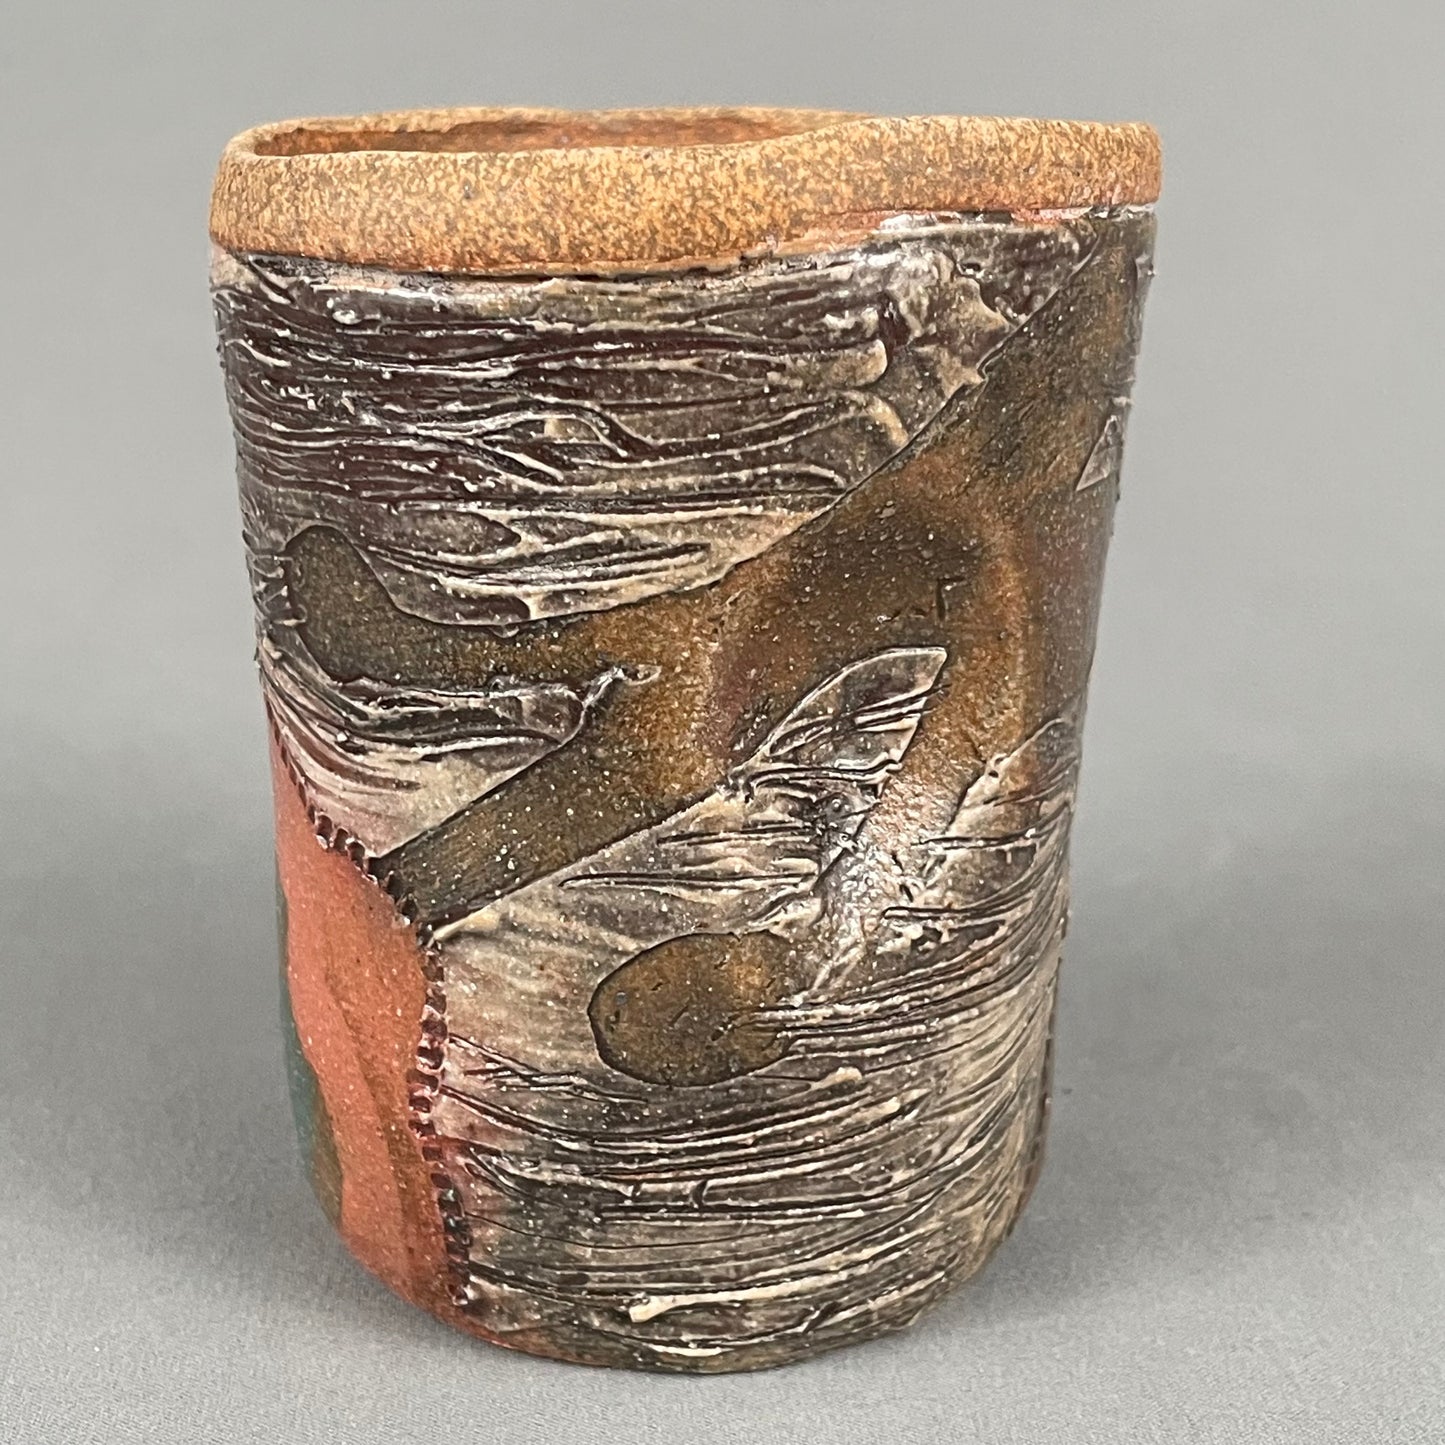 Rustic Cup #4